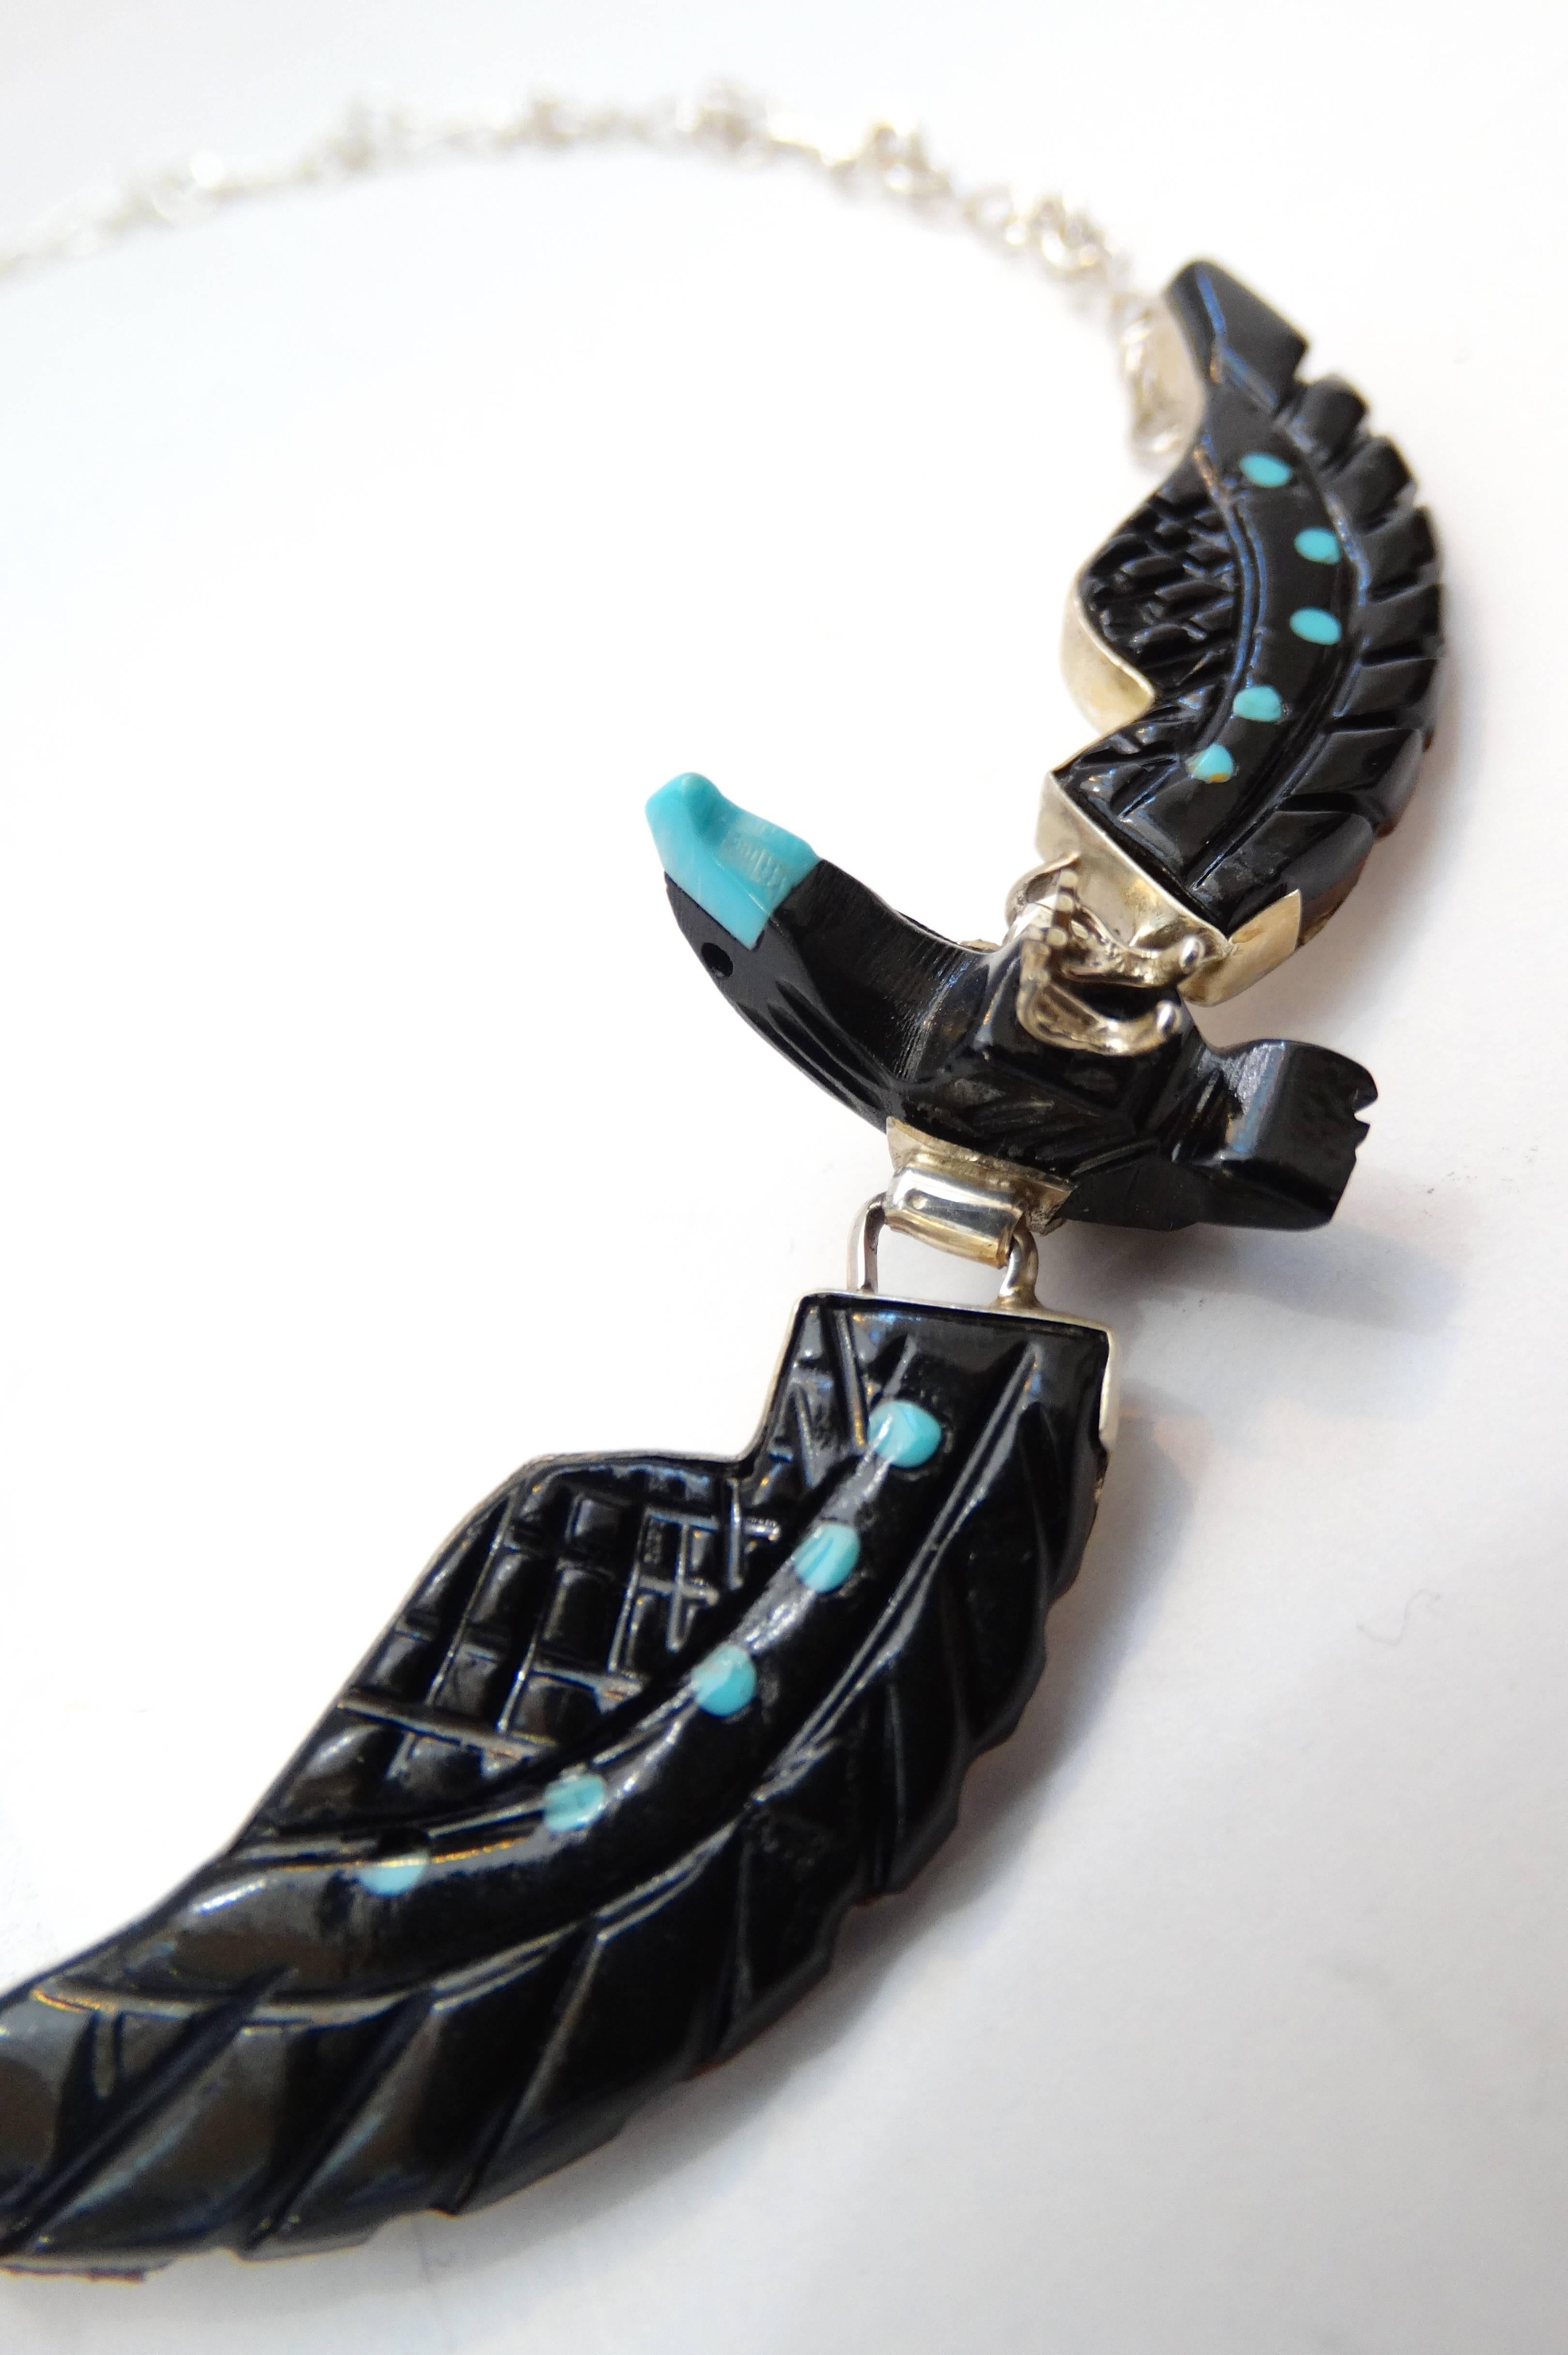 Amazing 1980s Navajo hawk necklace! Hawk charm made out of black onyx accented with bright blue toned turquoise on the wings and beak. Silver woven chain, sits higher up on the neck. Charm is backed with silver, signed Sterling on the middle of the